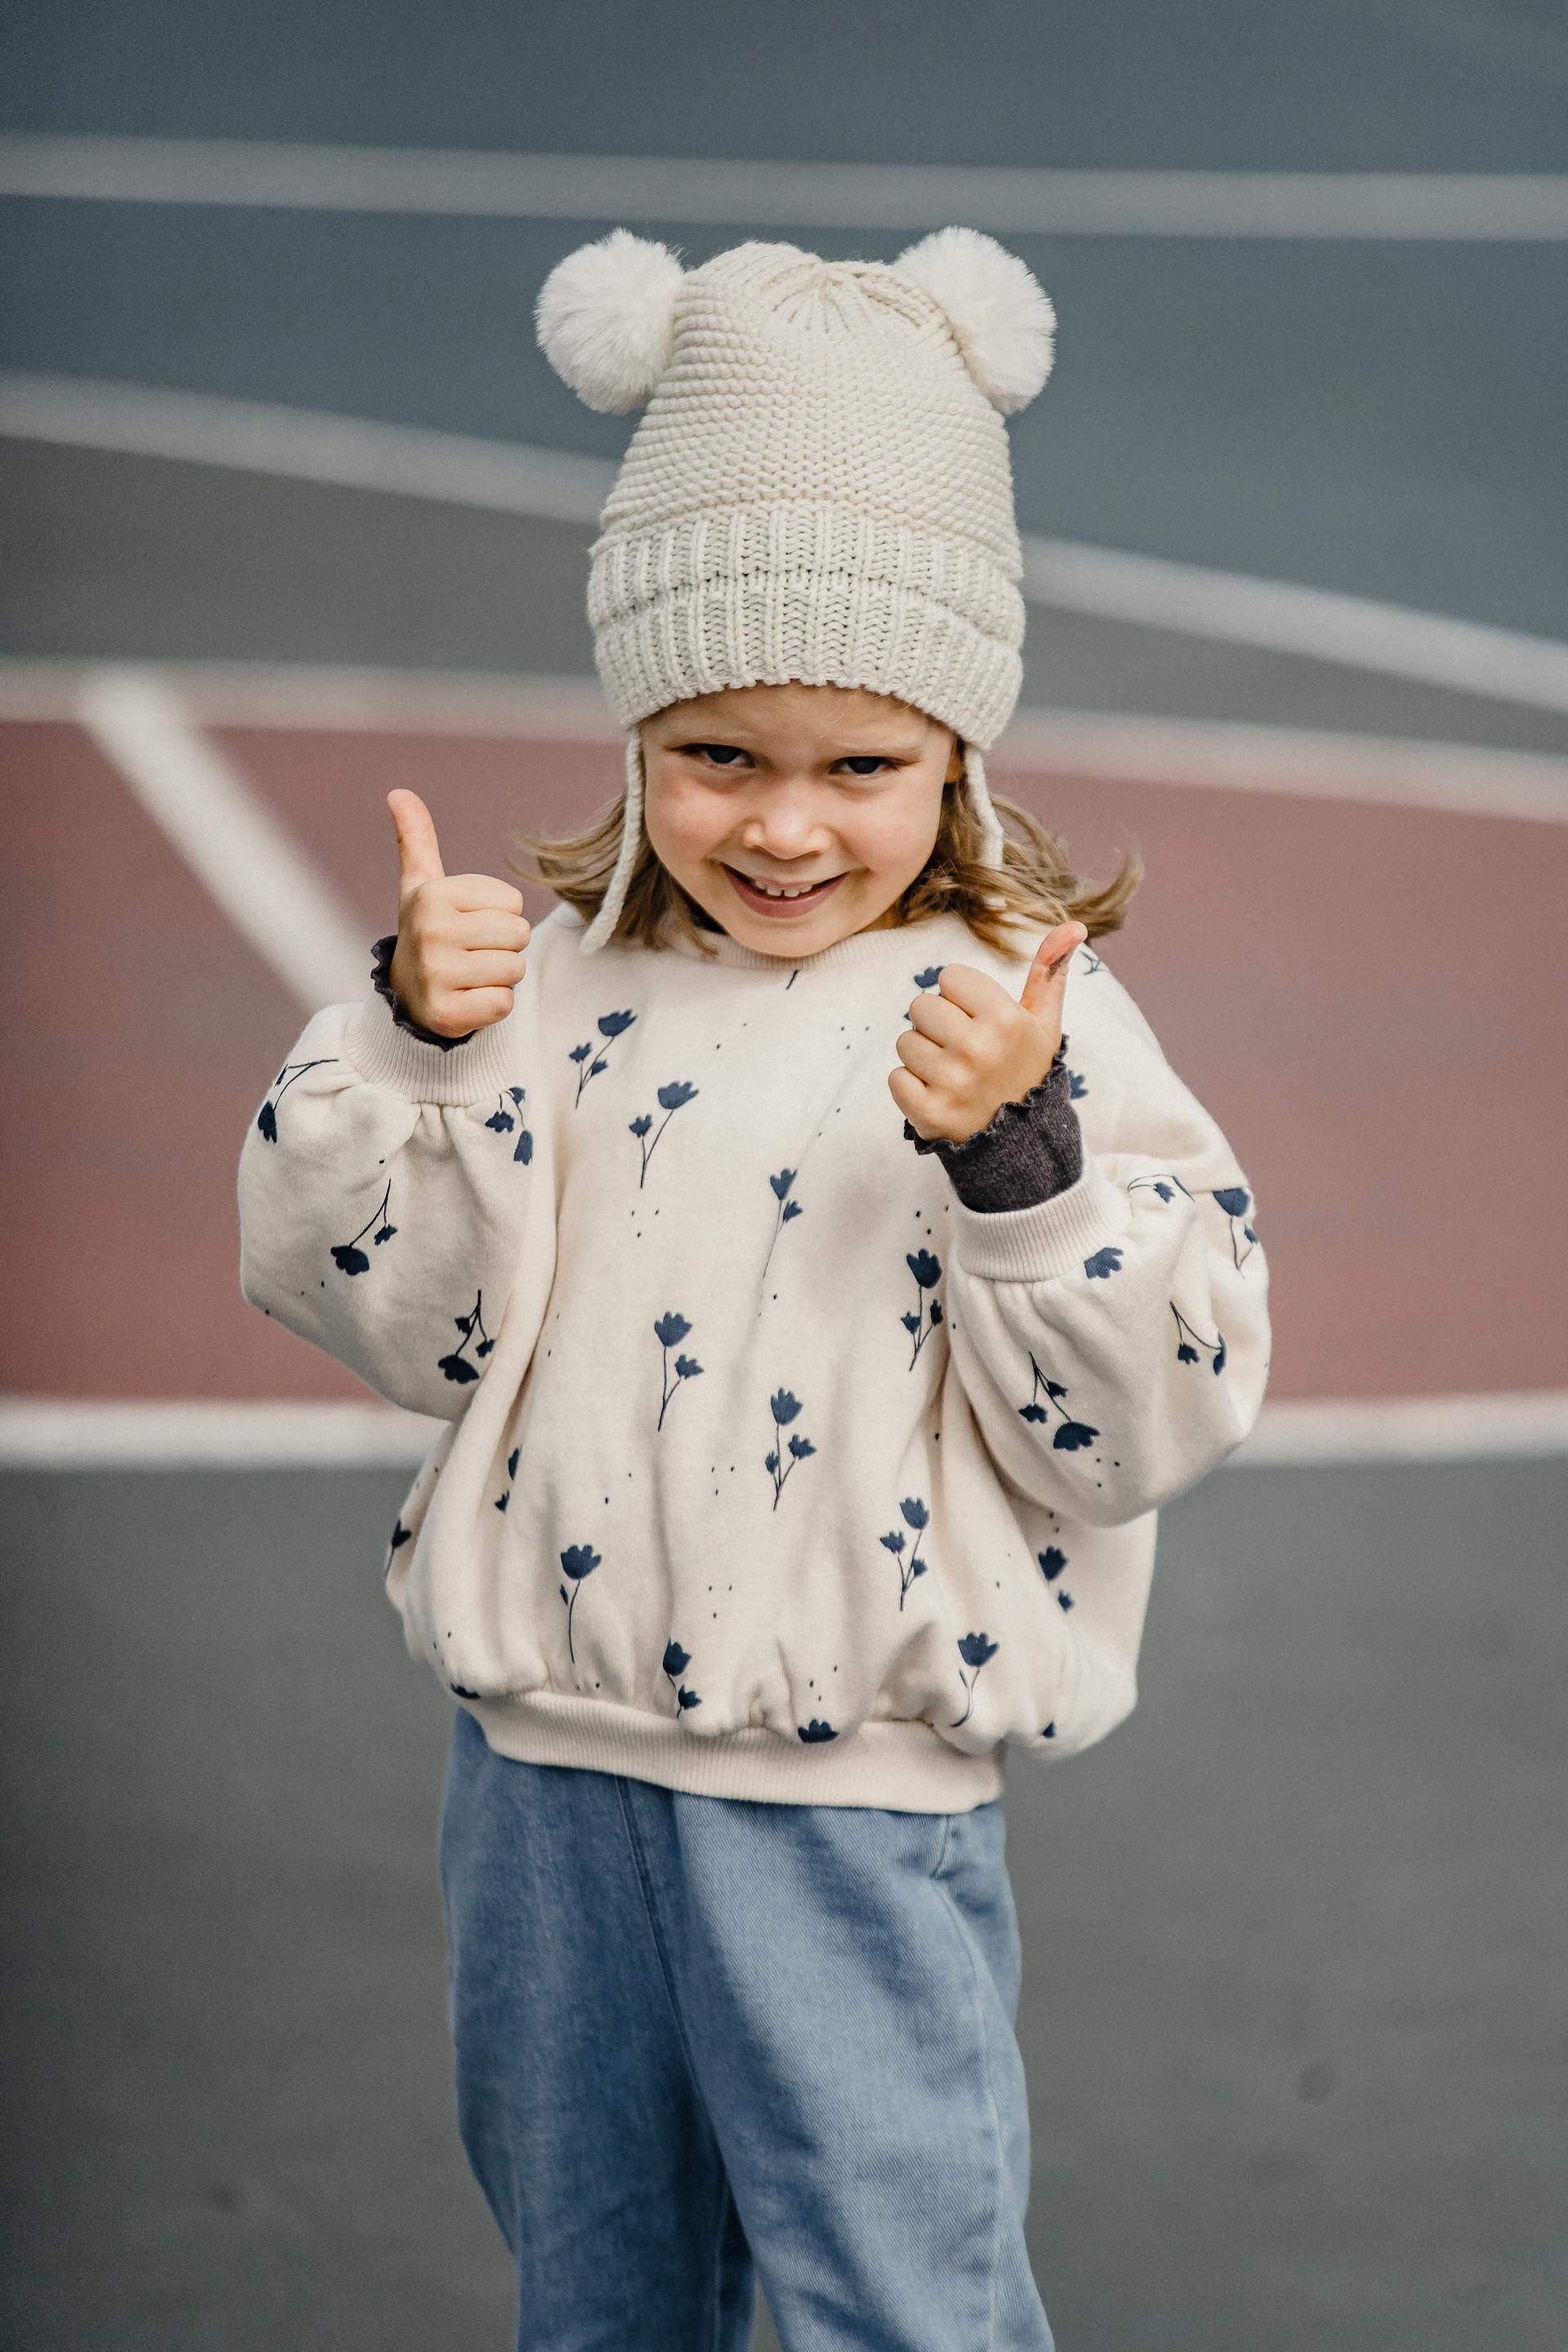 An excited little girl | Source: Pexels